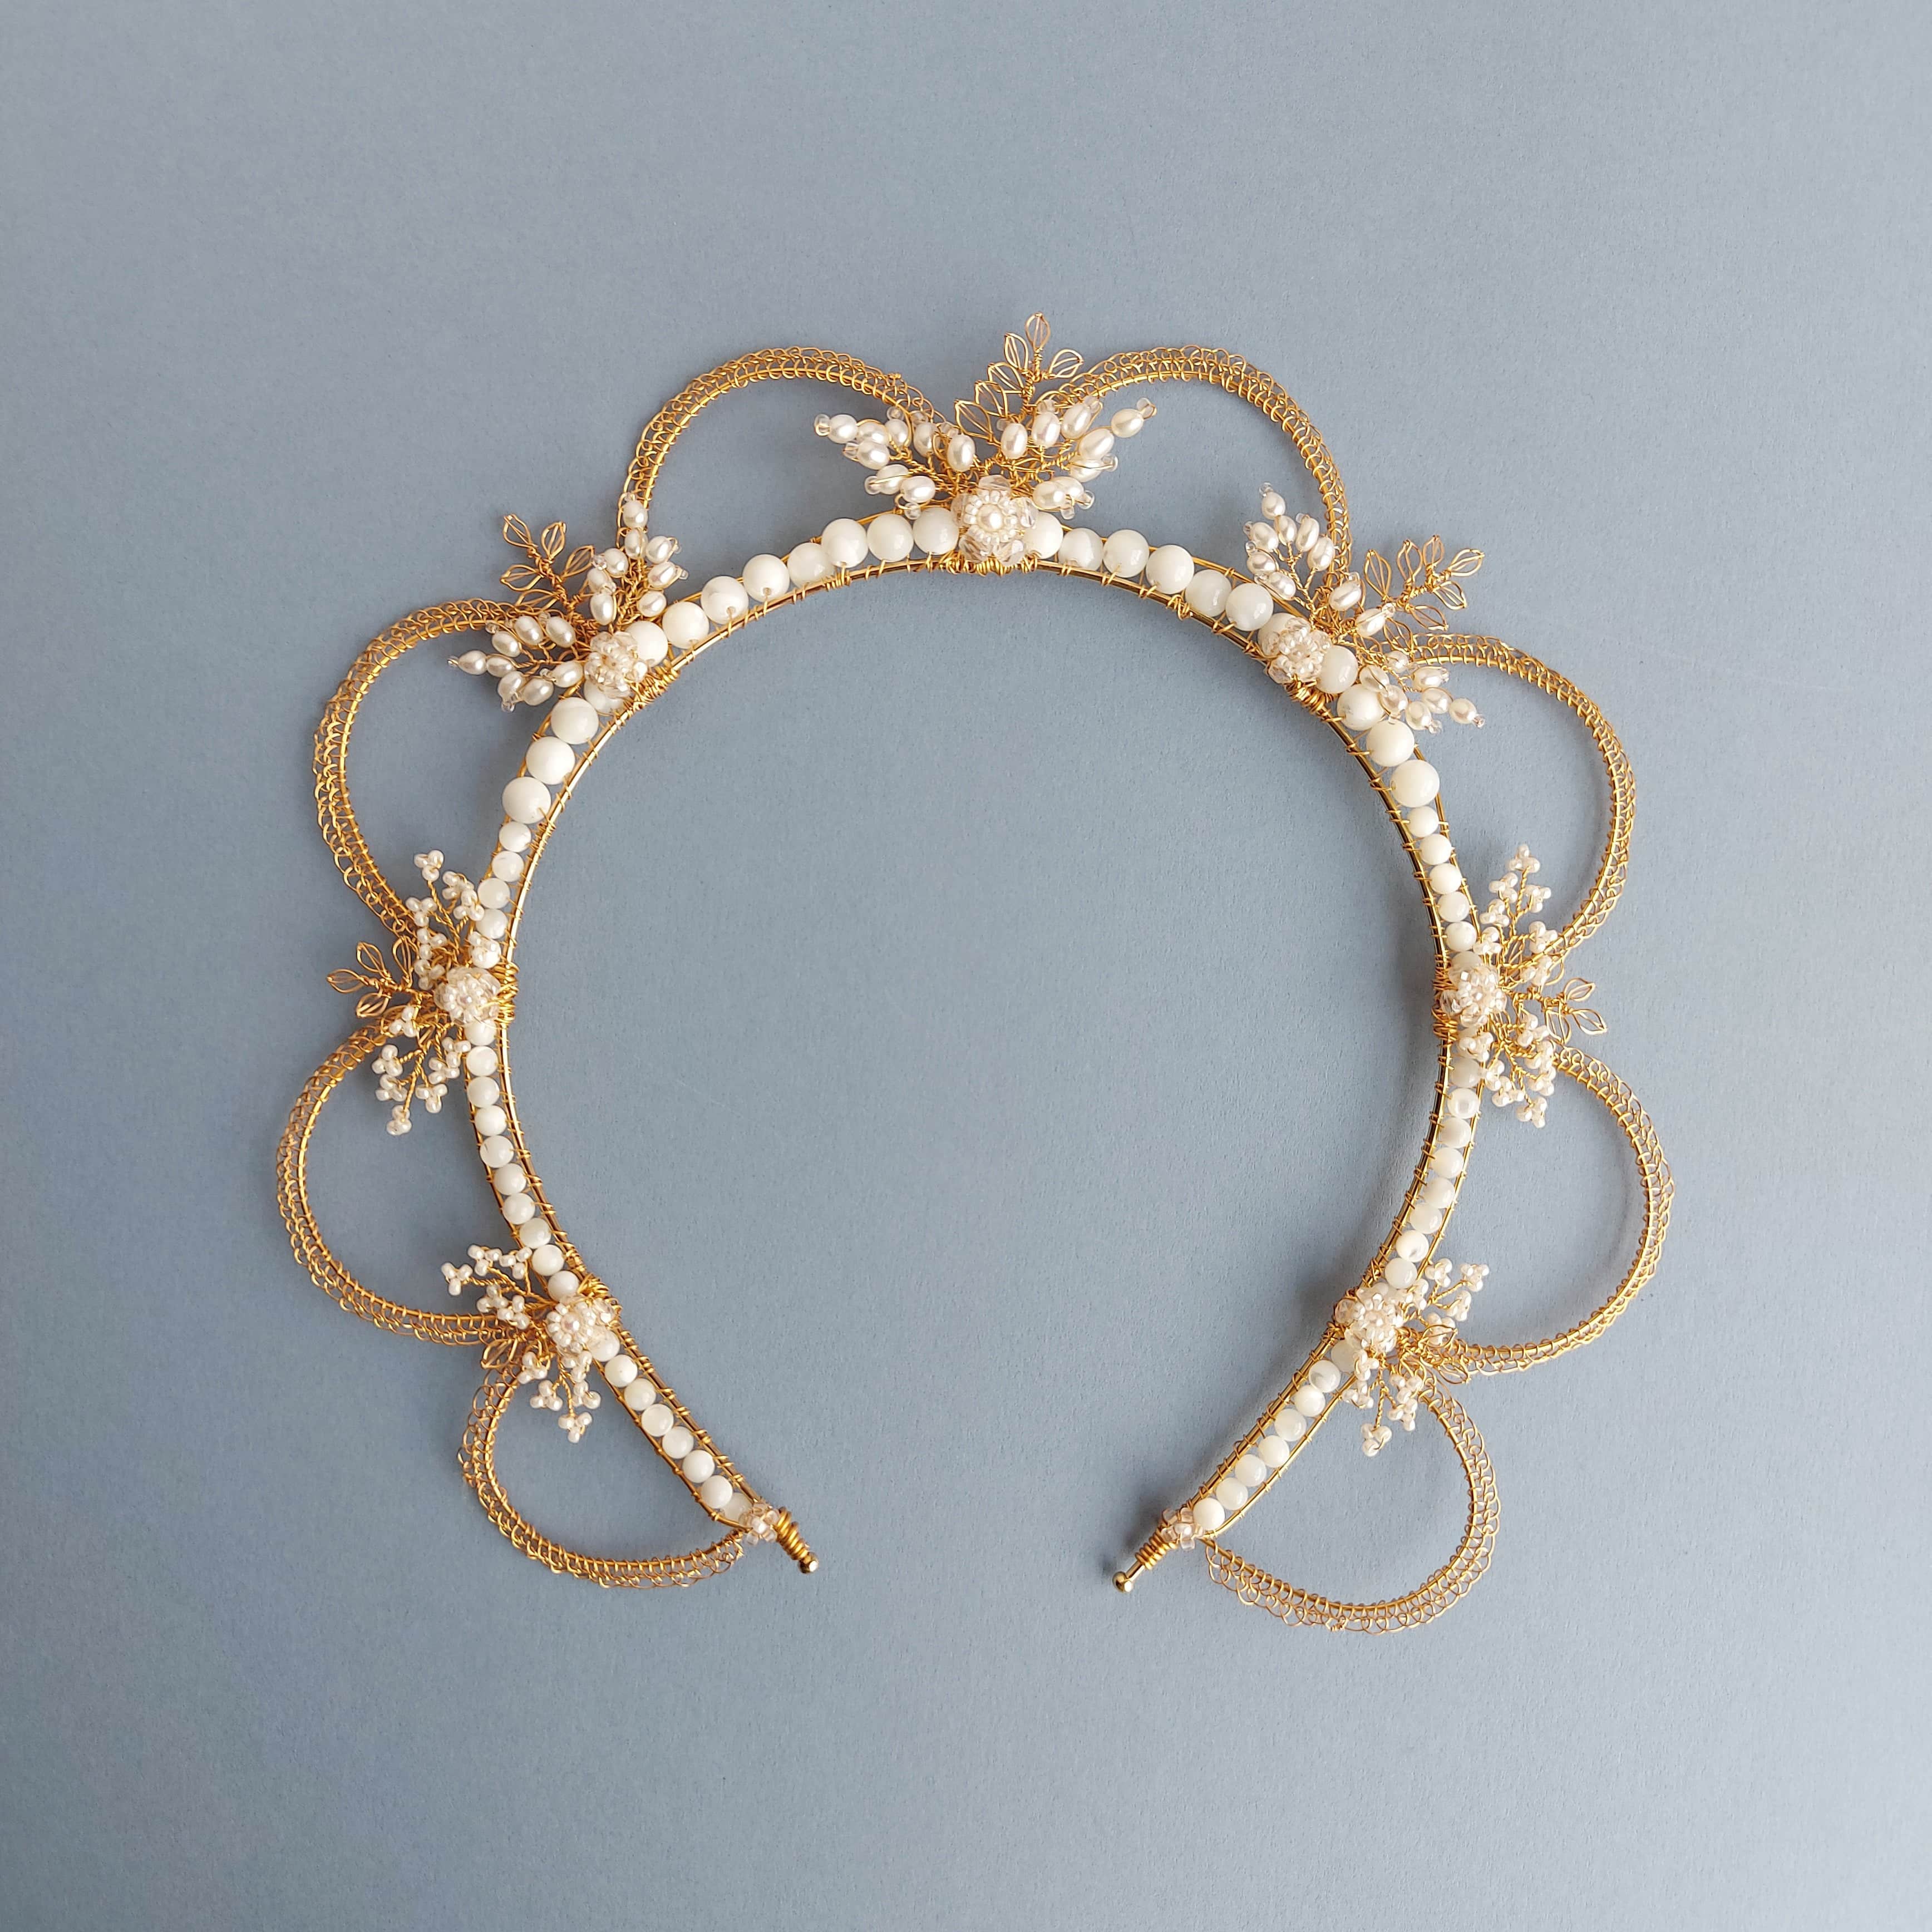 Oriana crown in gold with mother of pearl beads